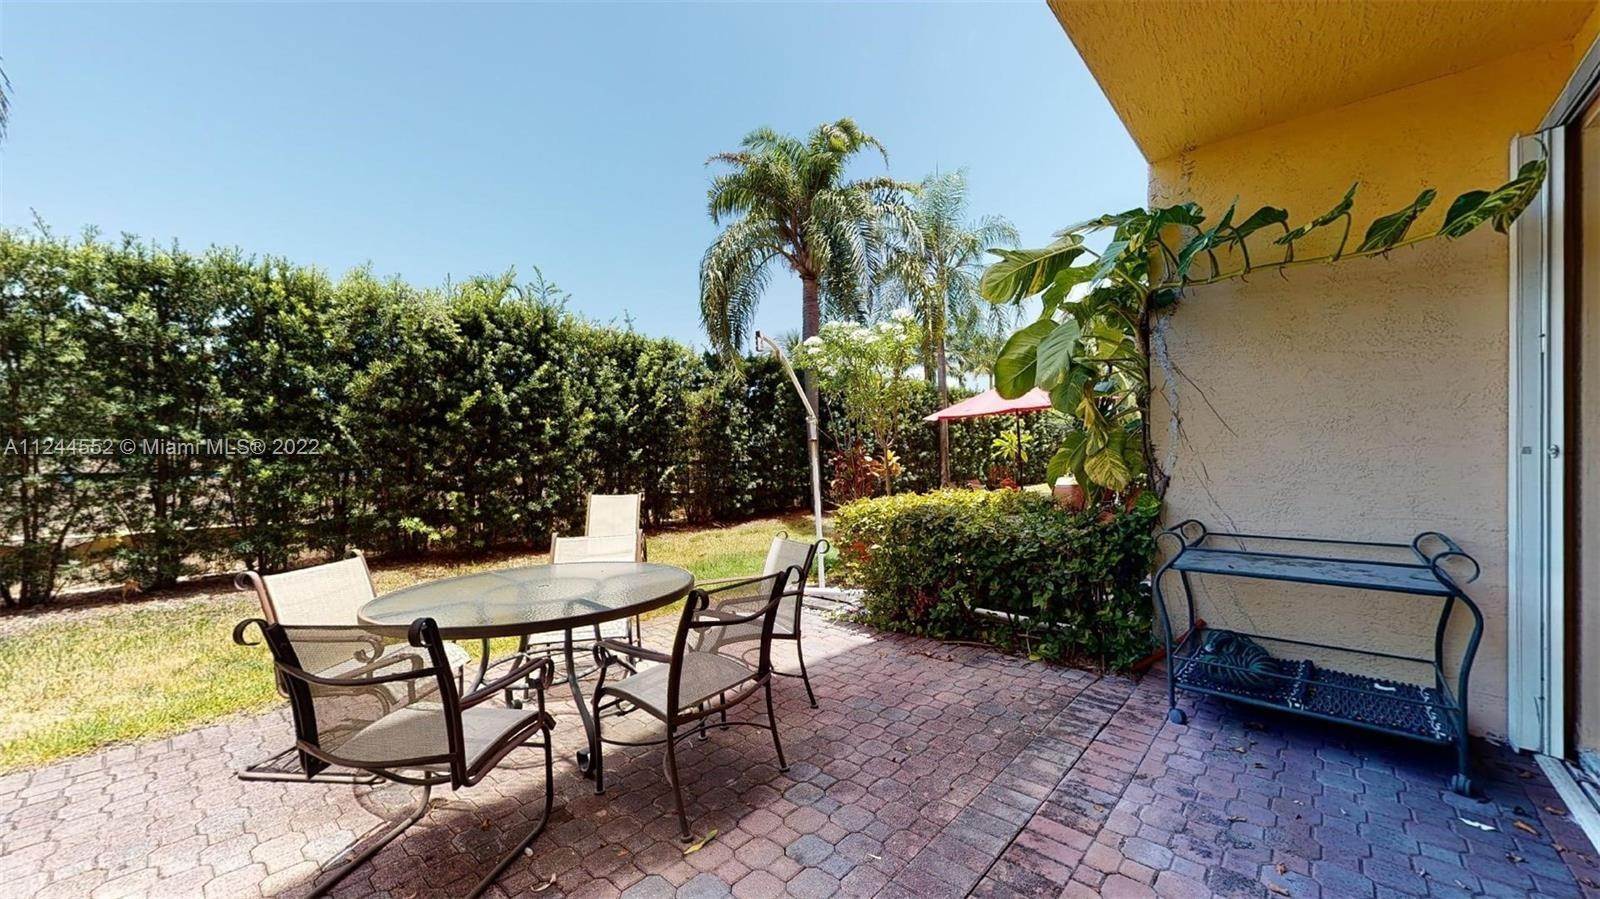 23. Townhouse for Sale at Aventura, FL 33180